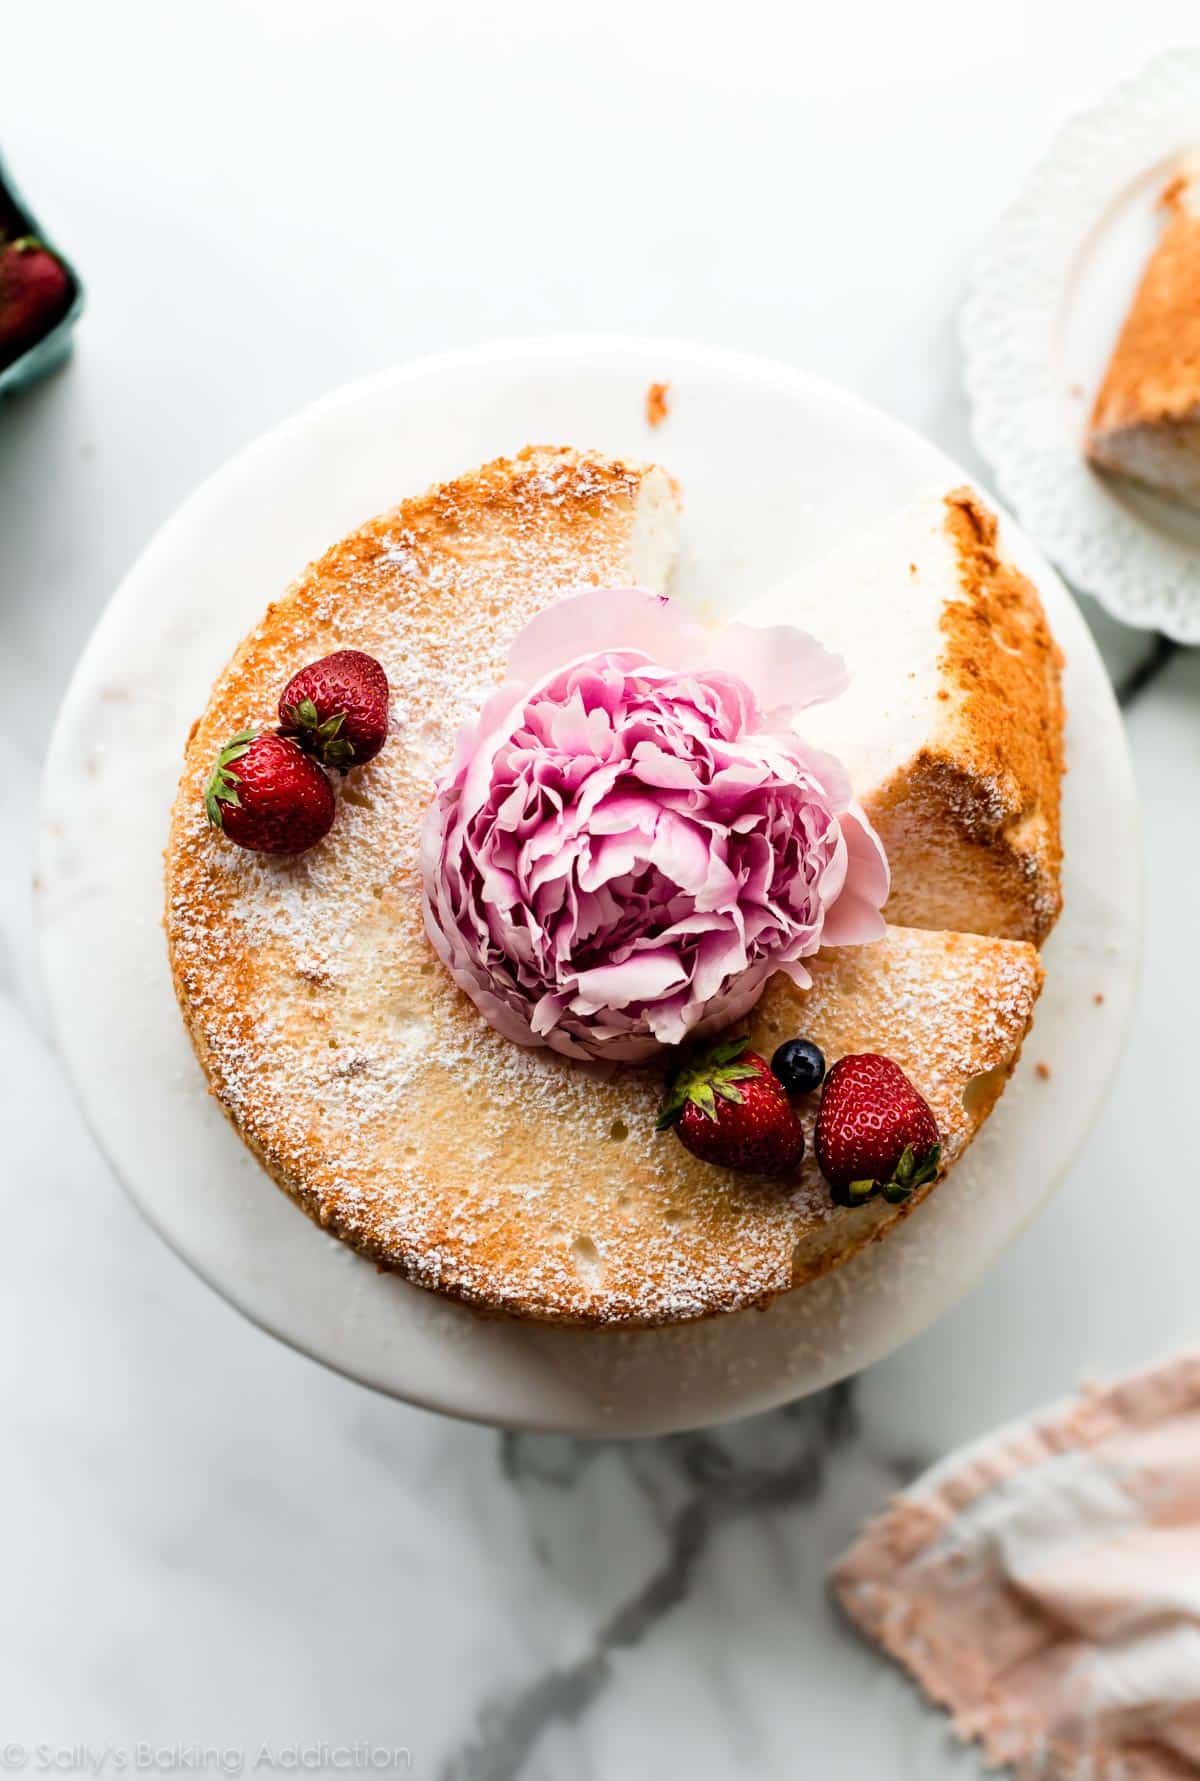 Top of angel food cake with berries and pink peony flower